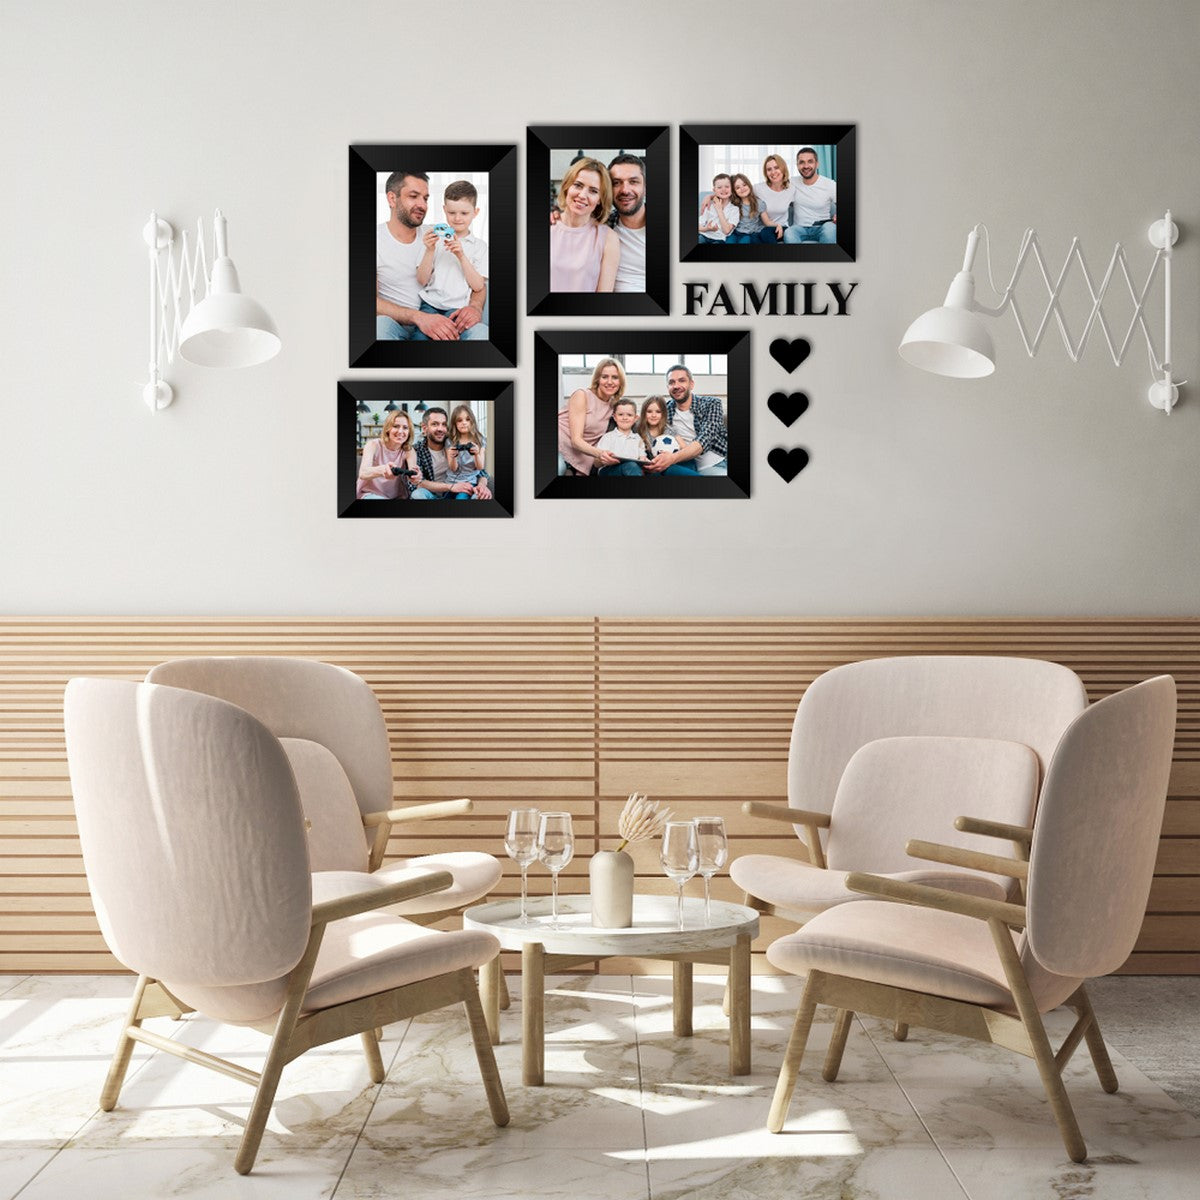 Memory Wall Collage Photo Frame - Set of 5 Photo Frames for 3 Photos of 4"x6", 2 Photos of 5"x7", 1 Piece of FAMILY, 3 Pieces of HEARTS 2